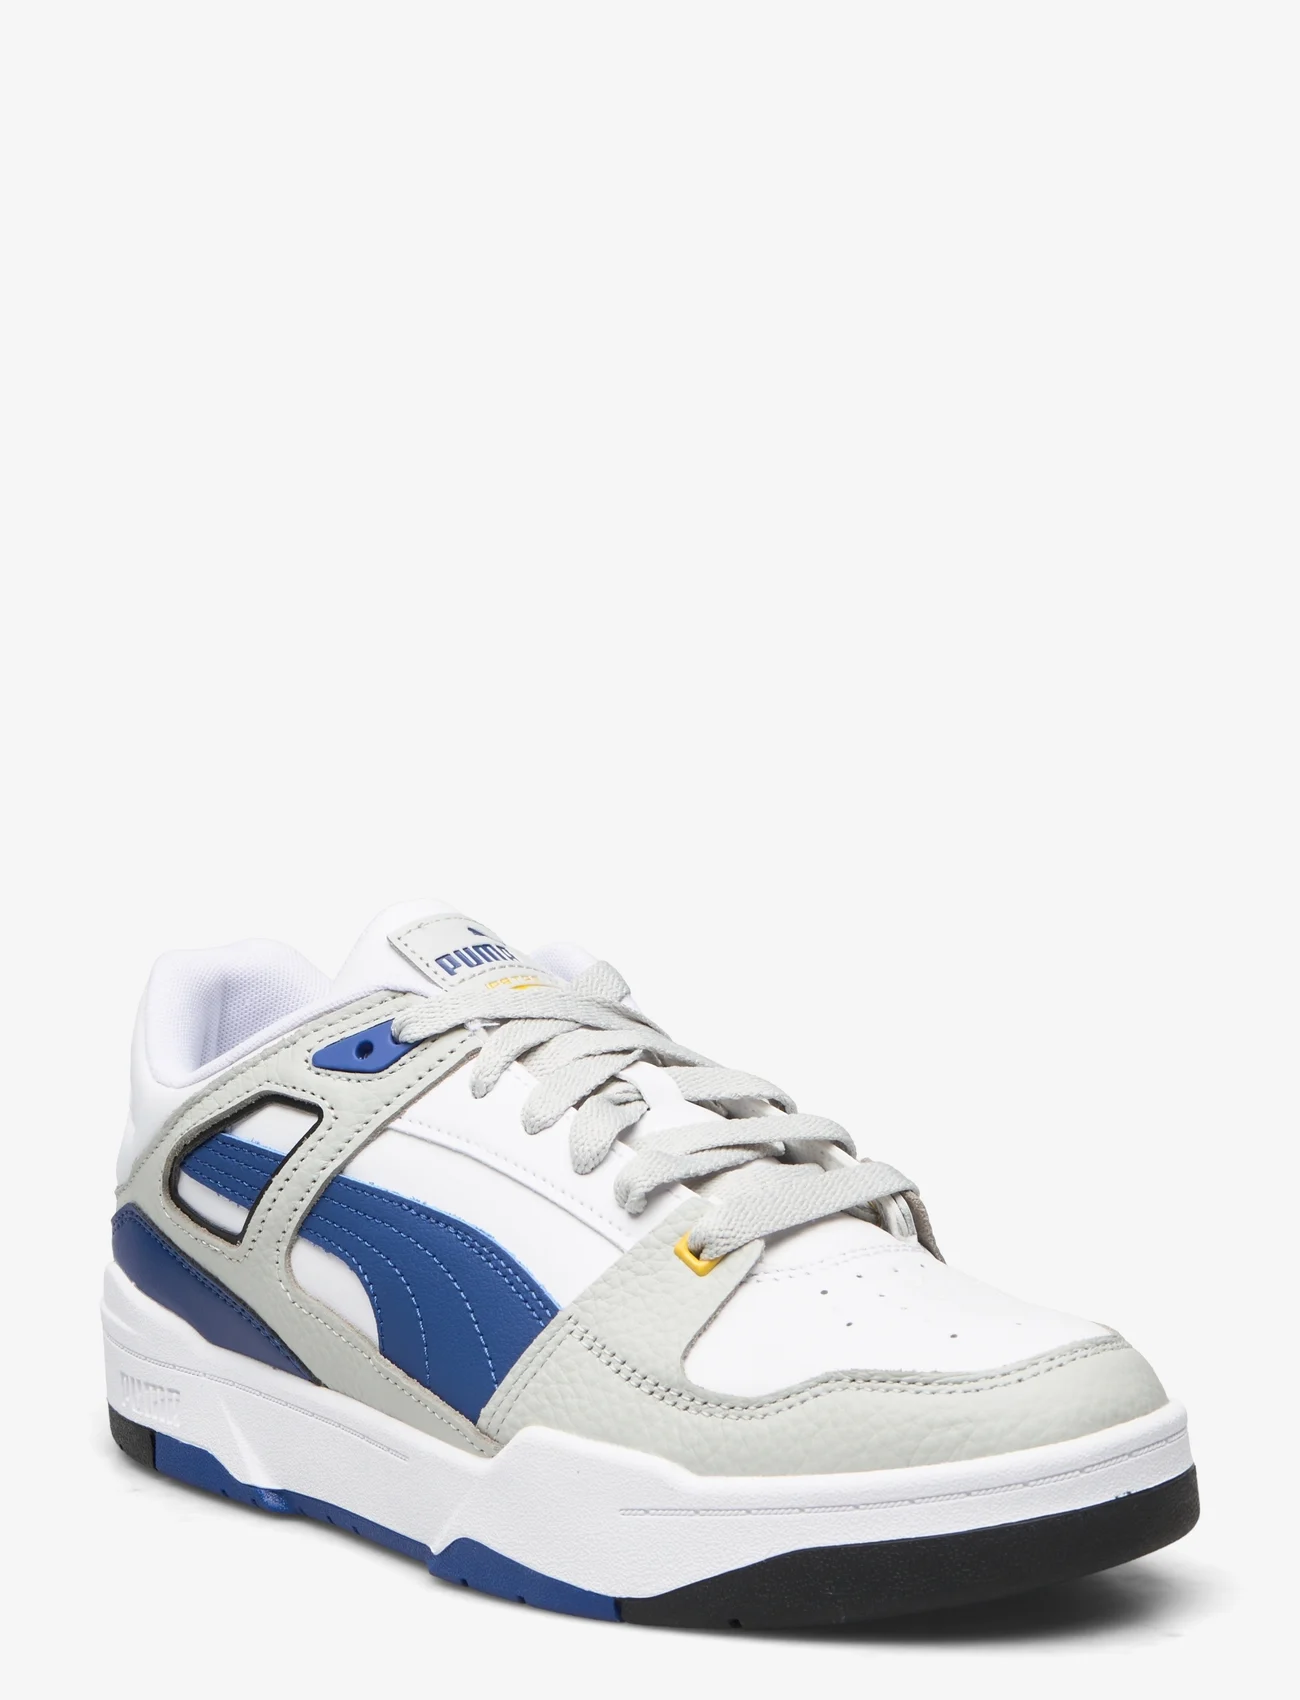 PUMA - Slipstream lth - lage sneakers - puma white-clyde royal - 0